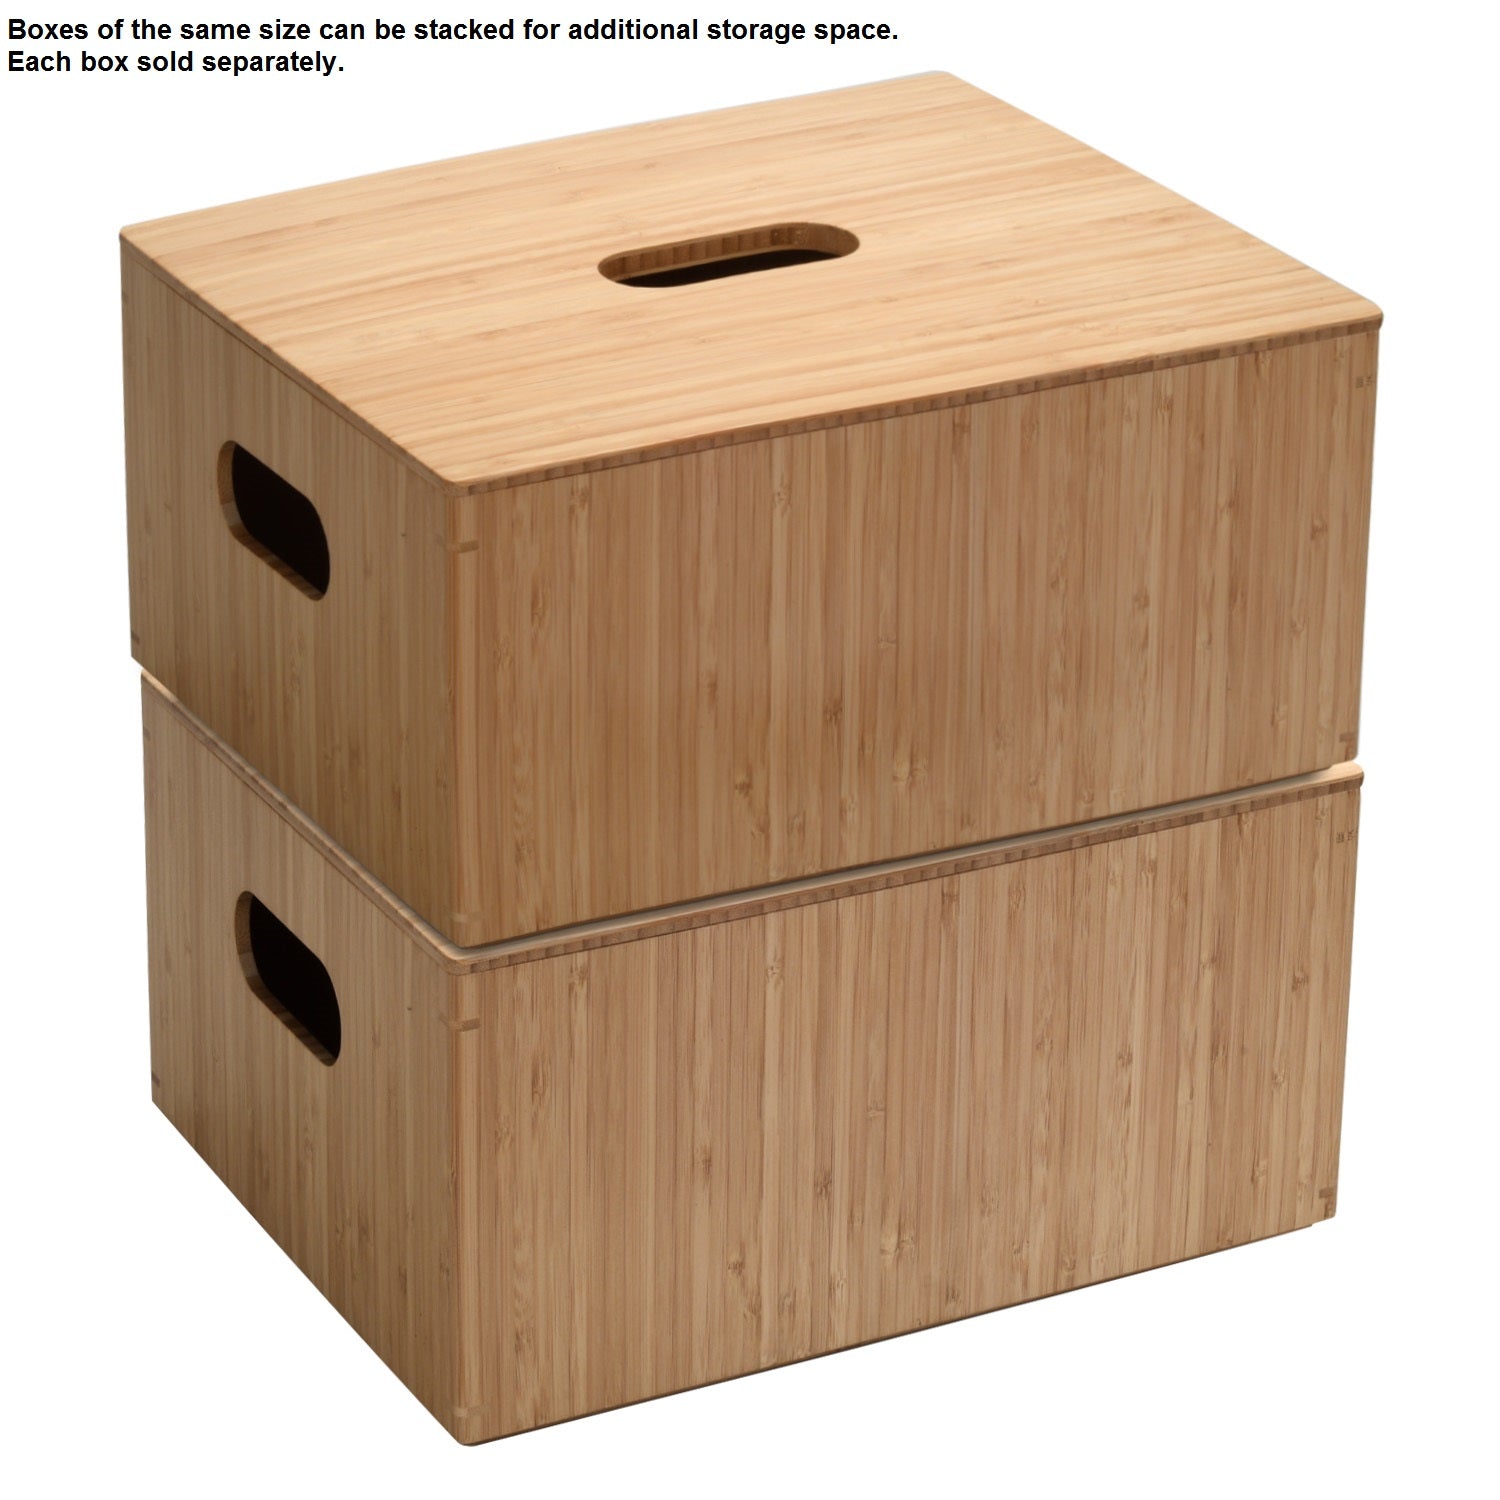 Bamboo Small Storage Box with Lid Included - MobilevisionUS